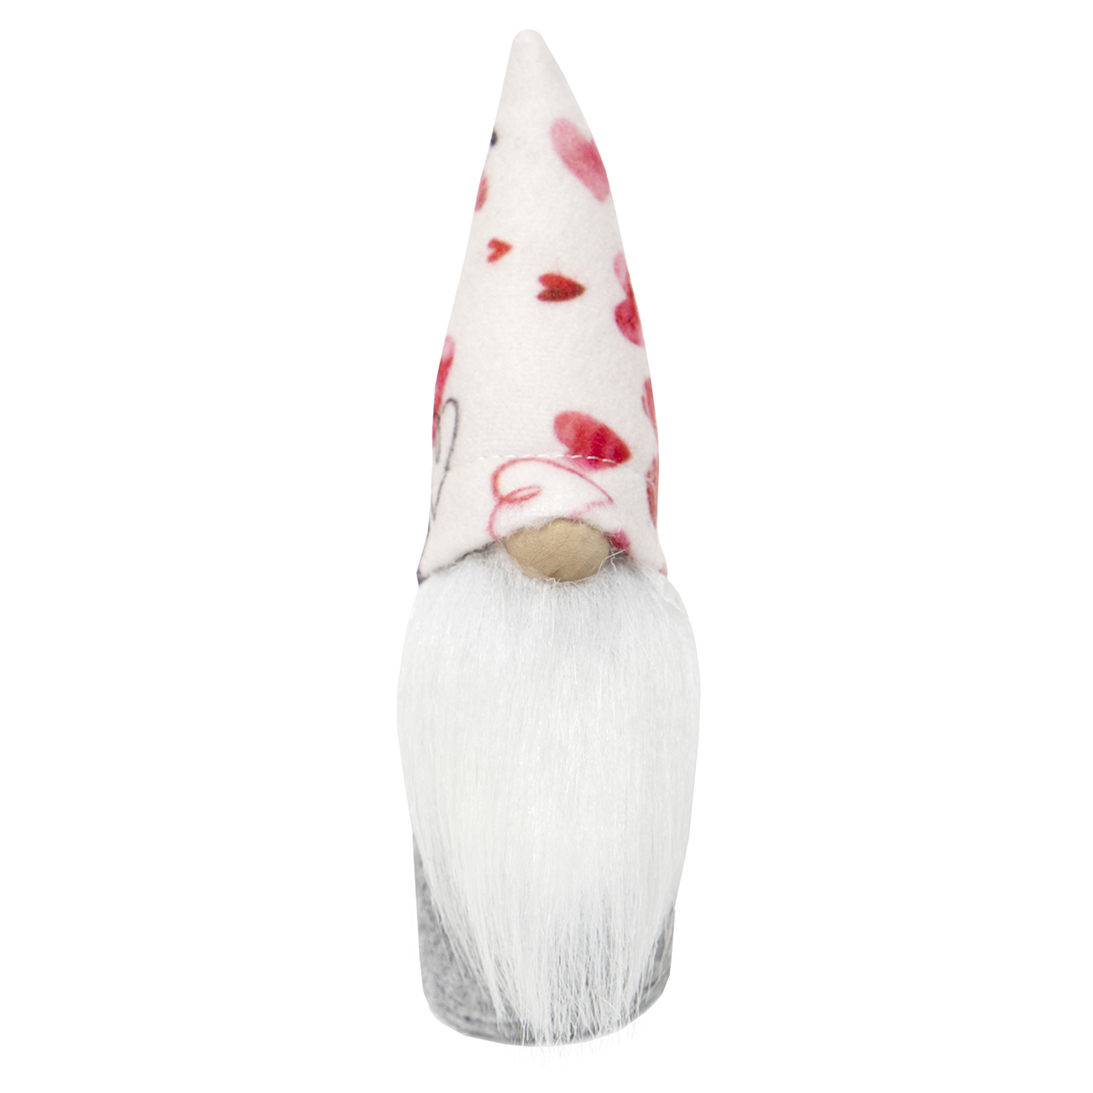 b50 Sir Heartsalot Gnome with Wood Nose 6.5" Small